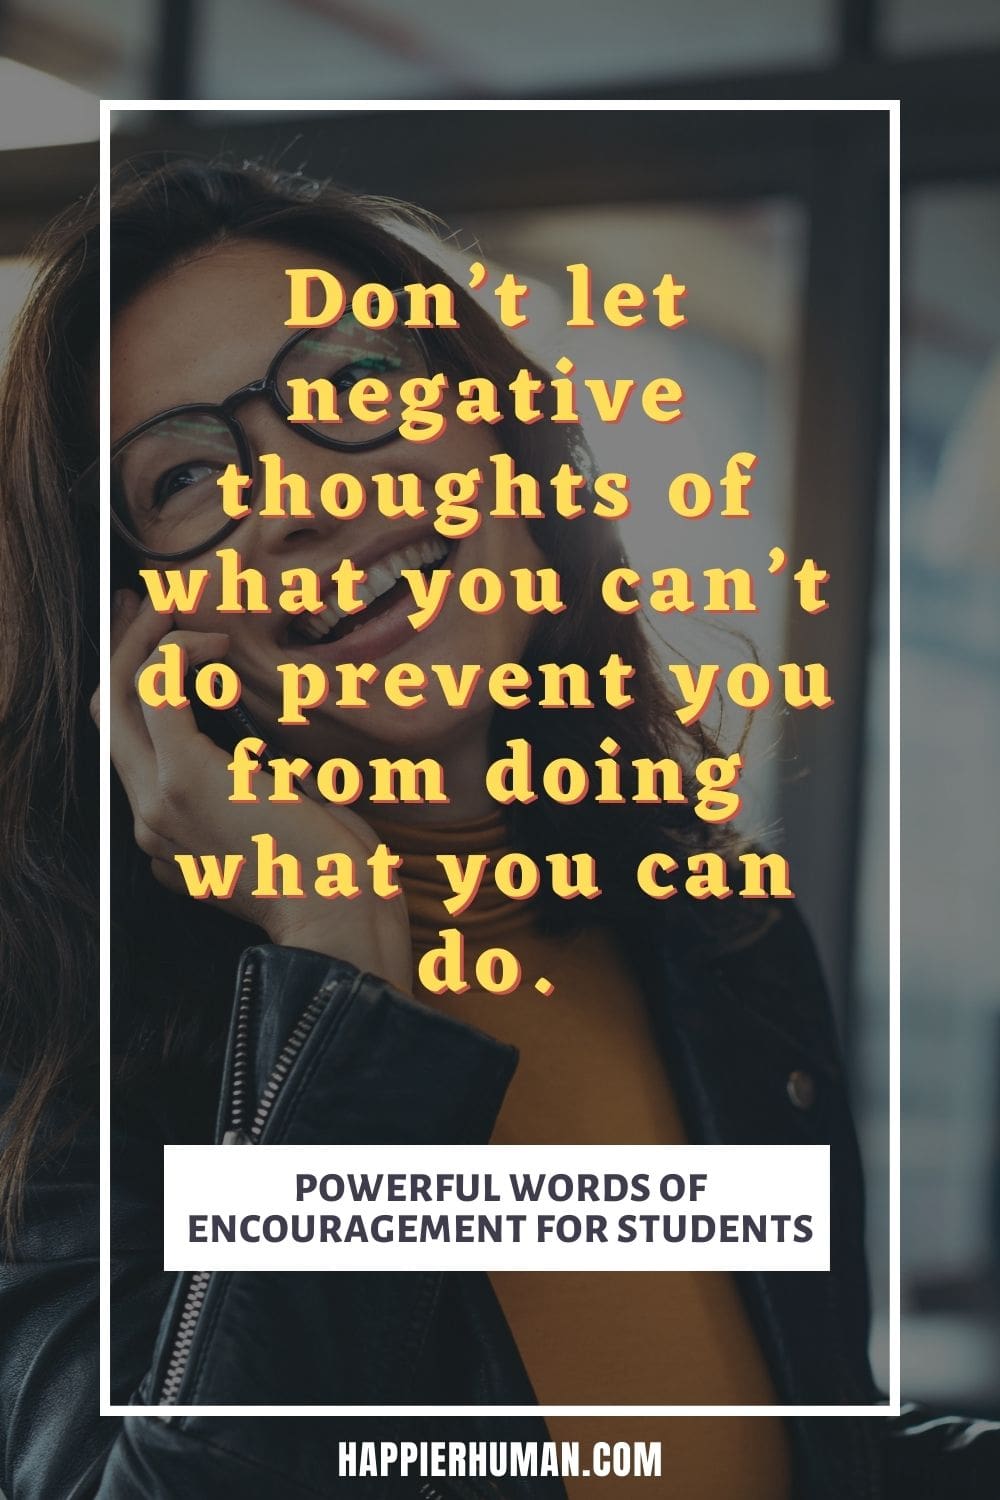 Words of Encouragement for Students -Don’t let negative thoughts of what you can’t do prevent you from doing what you can do. | words of encouragement for students taking exams | words of encouragement for students from teachers | wonderful words of encouragement for college students #wordsofencouragement #studyhabits #powerfulwords